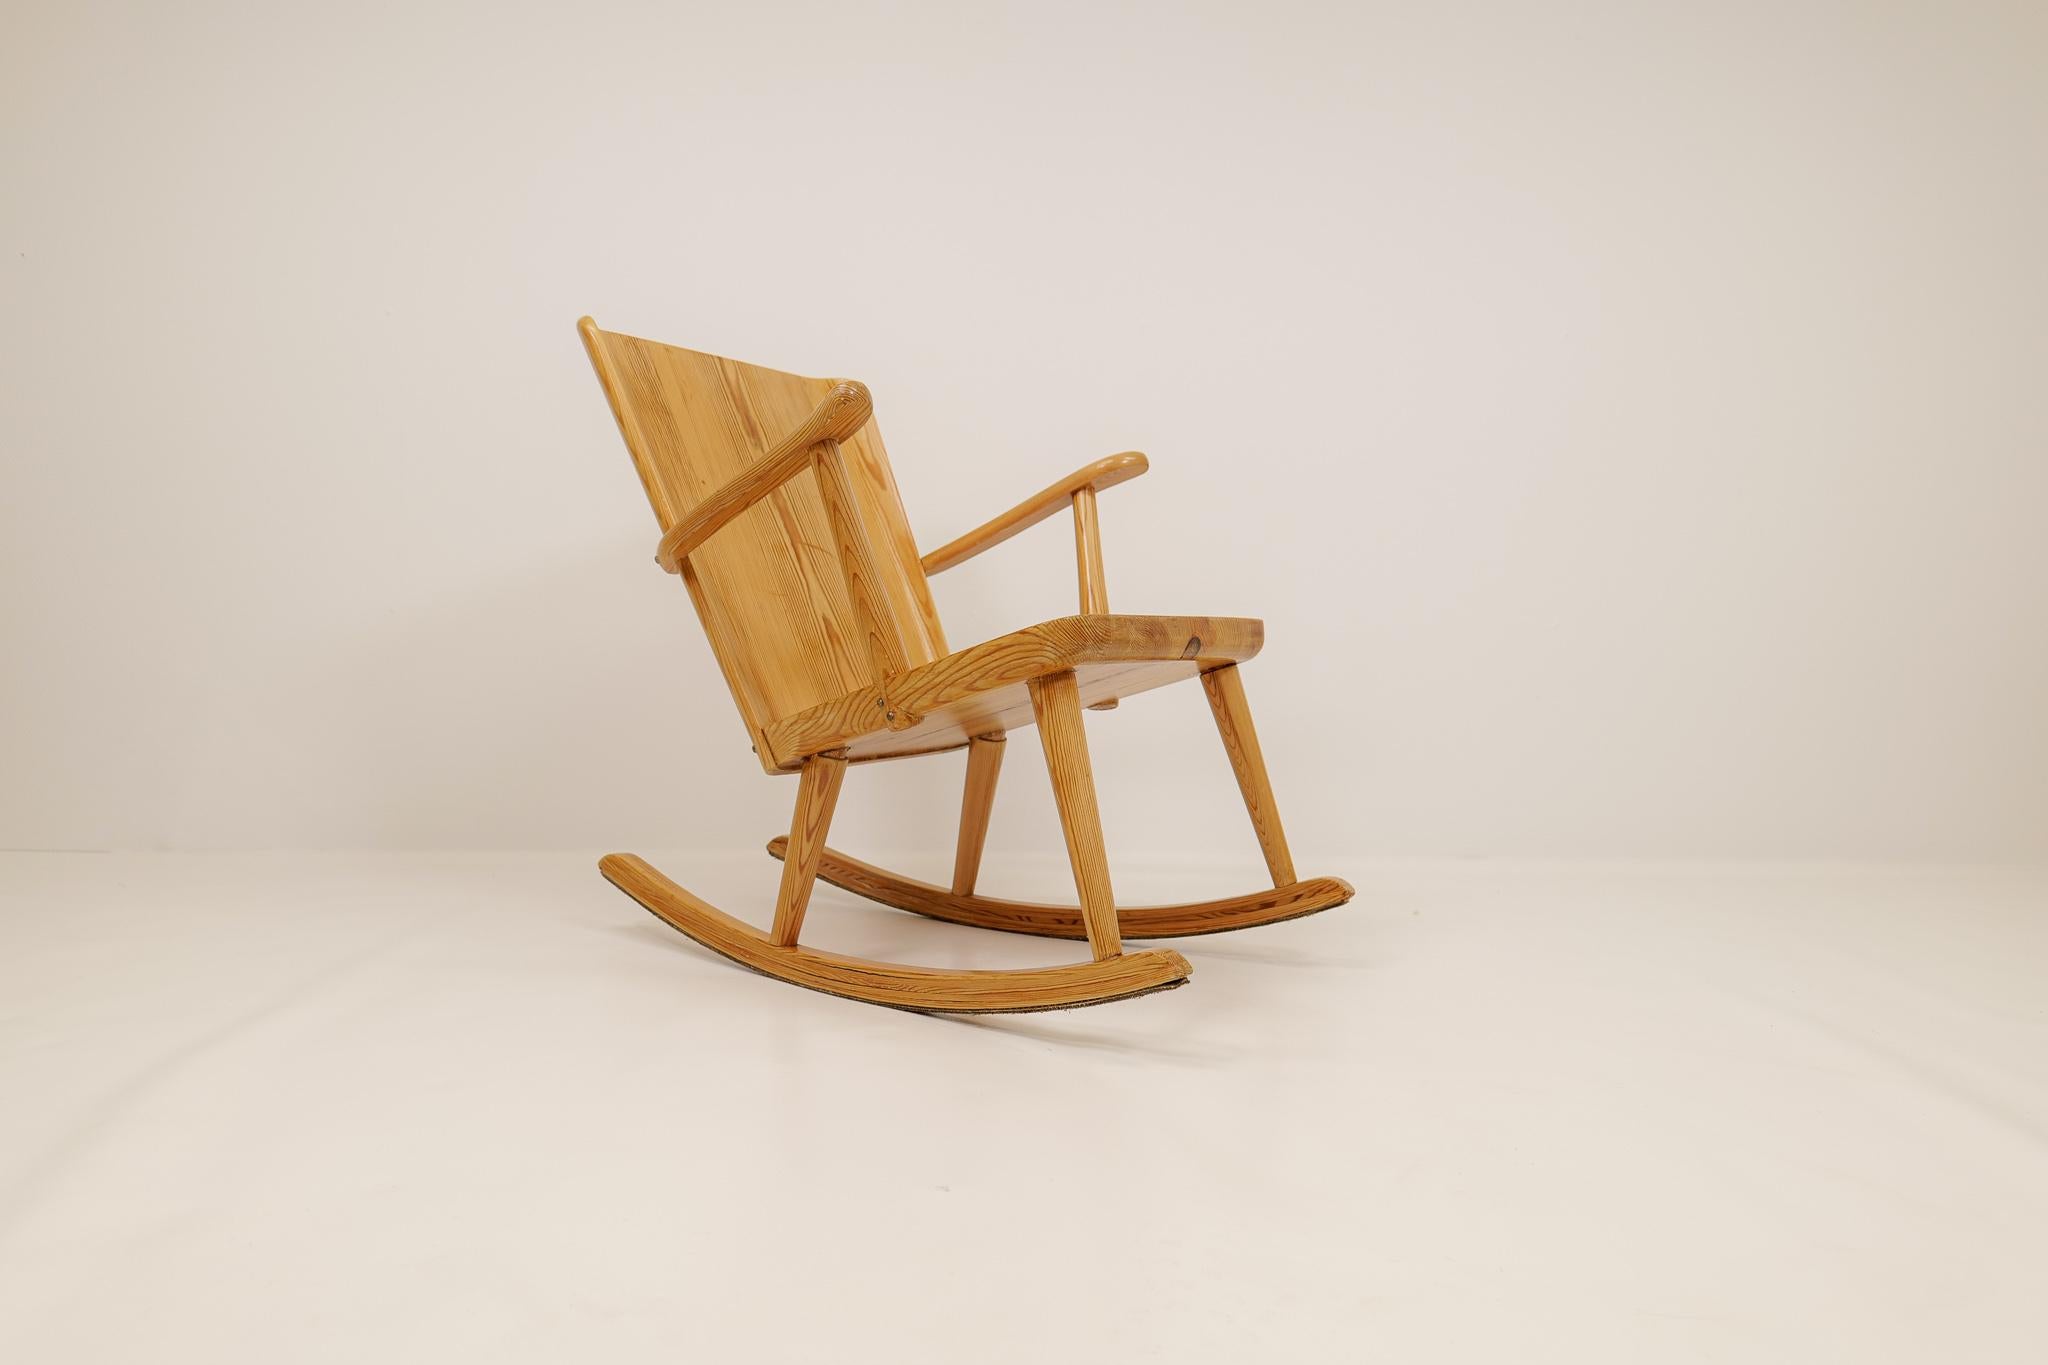 Rocking chair, made in solid pine, designed by Göran Malmvall for Svensk Fur, Sweden. 
Modernist design in traditional Swedish workmanship, made to adapt to the new era in the late 1930s and early 1940s Swedish summer houses. 

Overall patina on